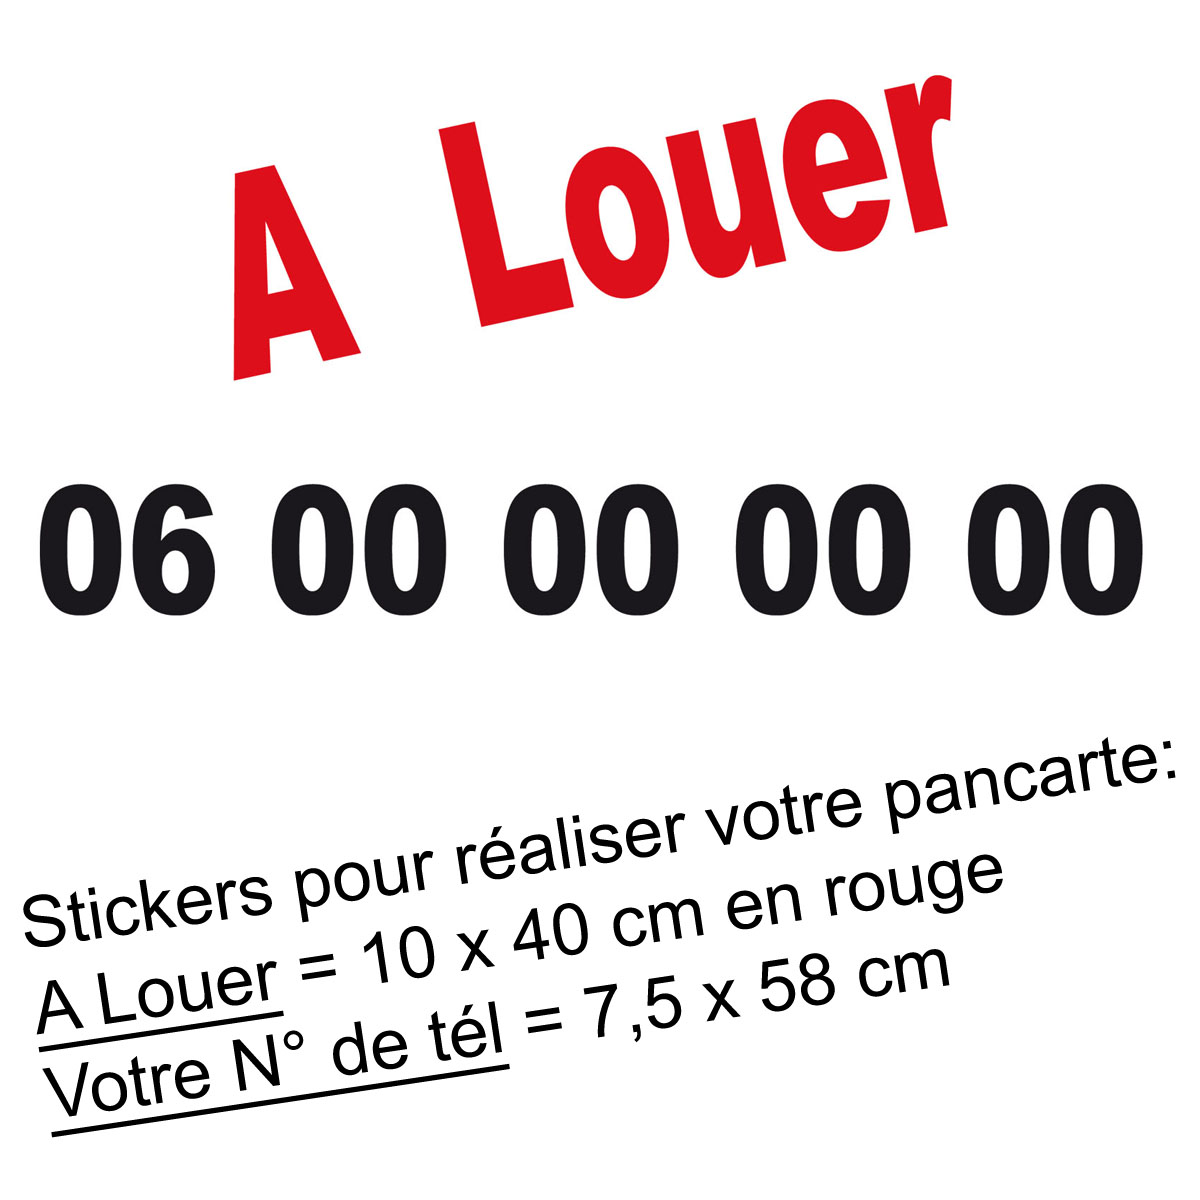 STICKERS A louer